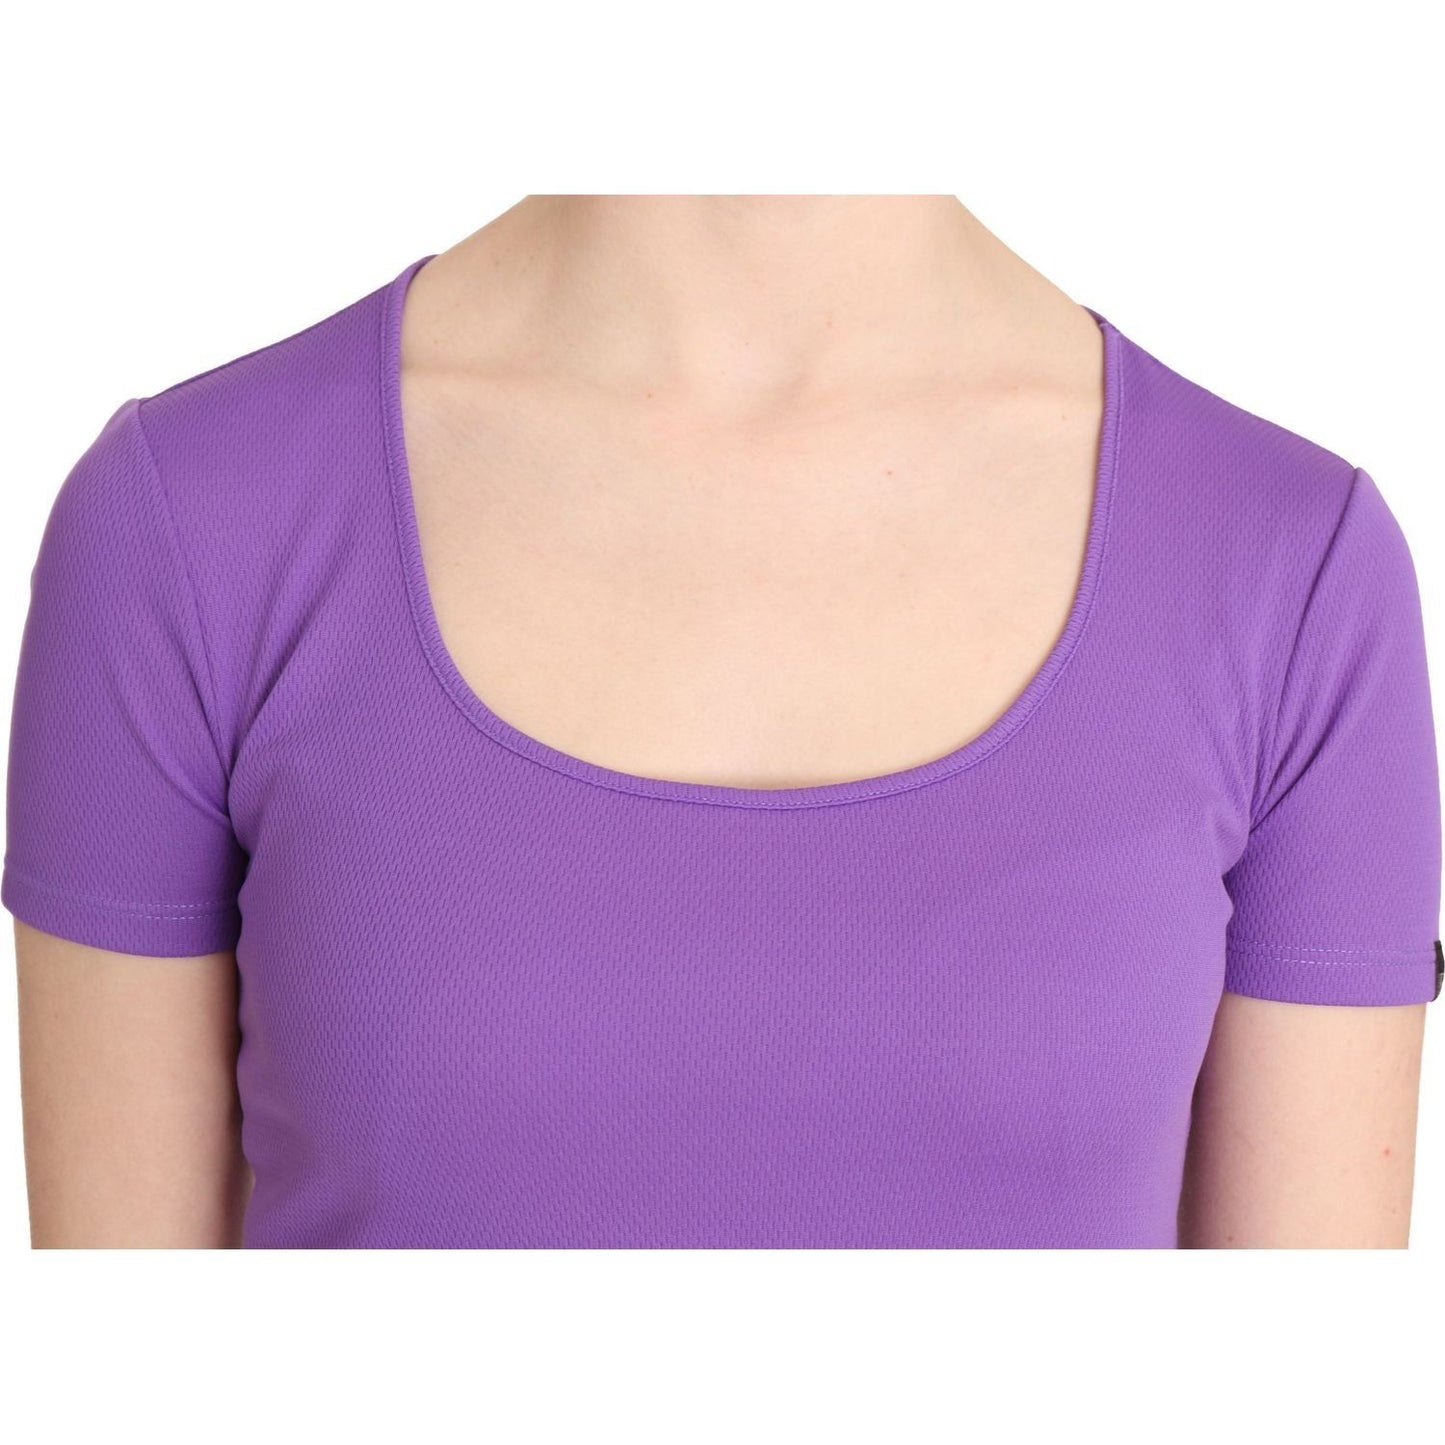 GF Ferre Chic Purple Casual Top for Everyday Elegance purple-100-polyester-short-sleeve-top-blouse IMG_1216-scaled-22cb0ca3-bb1.jpg